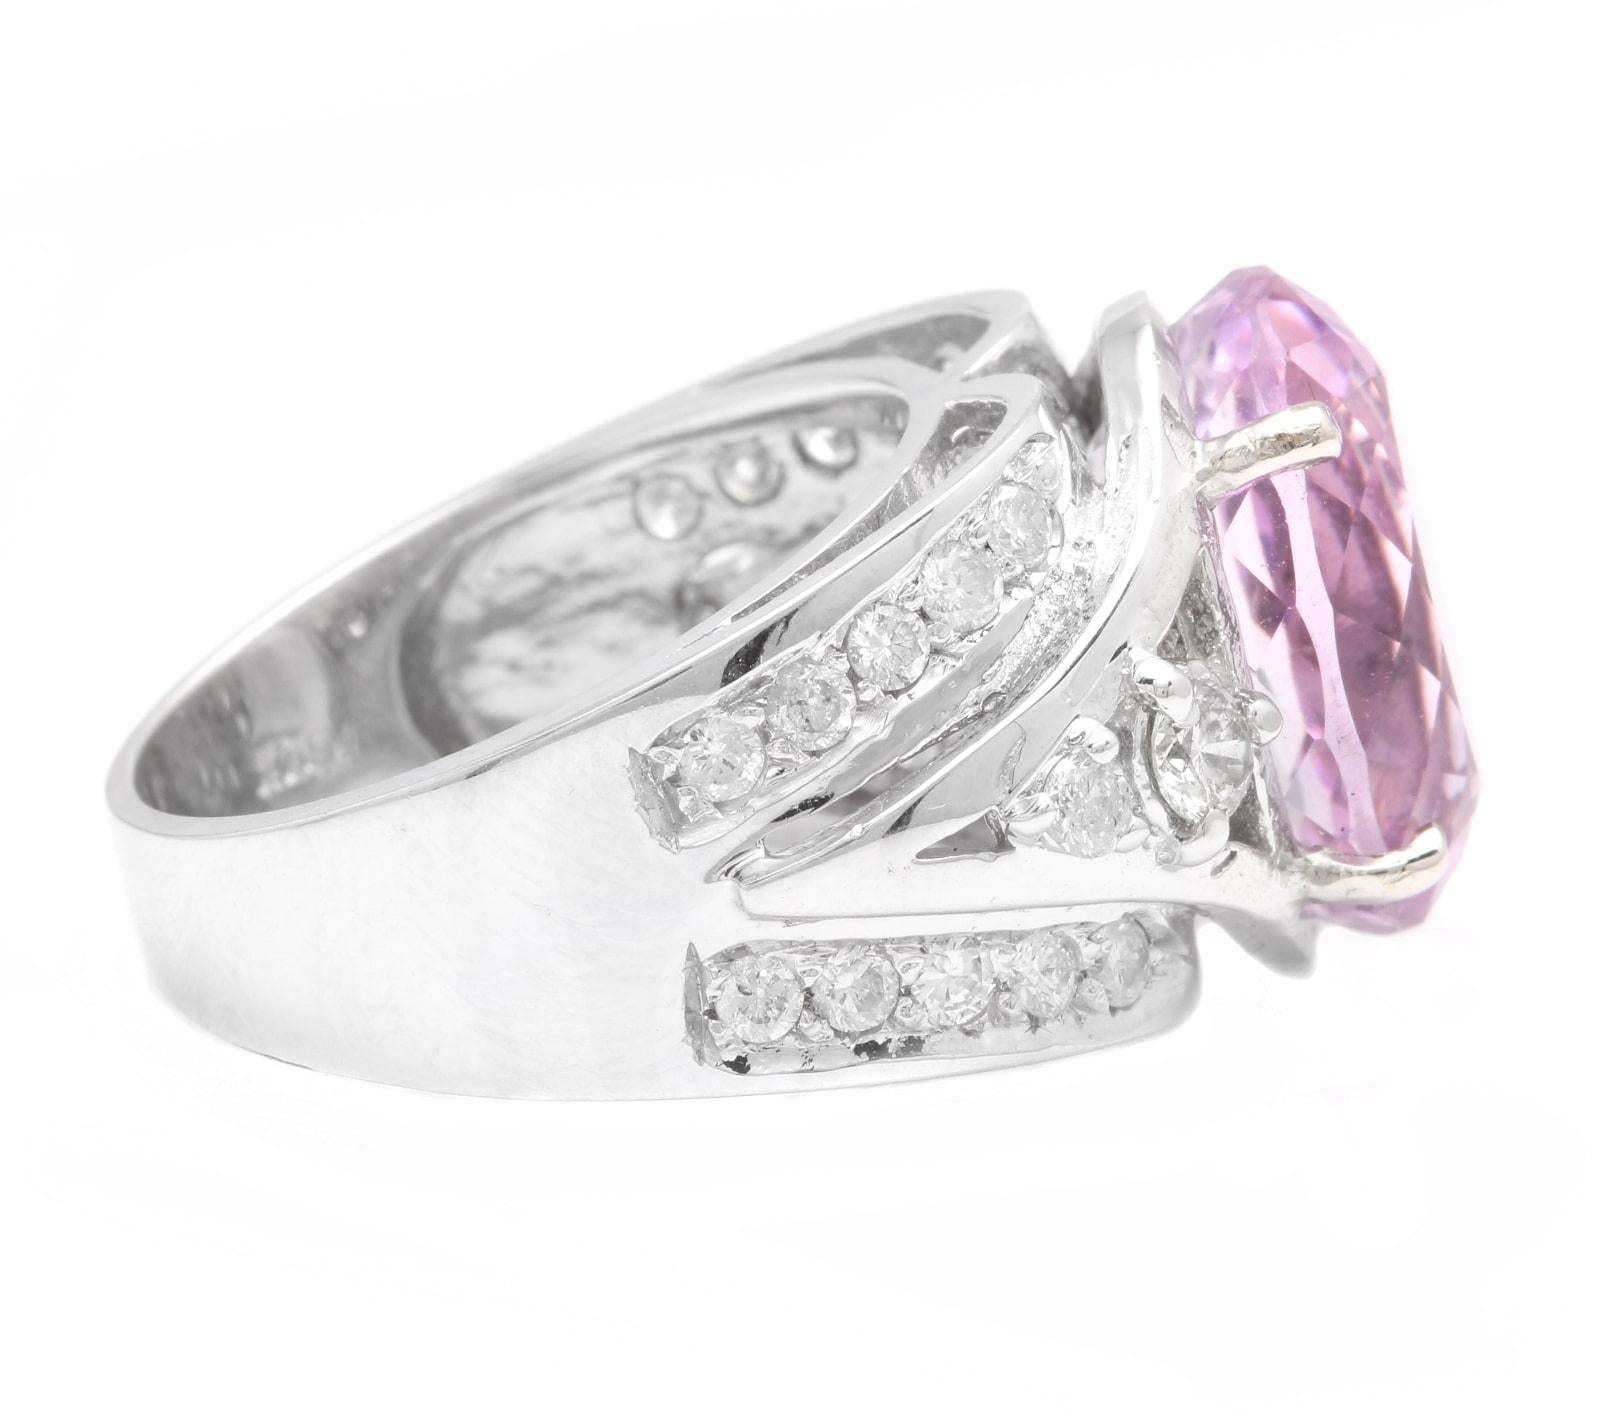 13.30 Carats Natural Kunzite and Diamond 14K Solid White Gold Ring

Suggested Replacement Value: $7,500.00

Total Natural Oval Cut Kunzite Weights: Approx. 12.00 Carats 

Kunzite Measures: Approx. 14.50 x 10.50mm

Kunzite Treatment: Heating

Natural